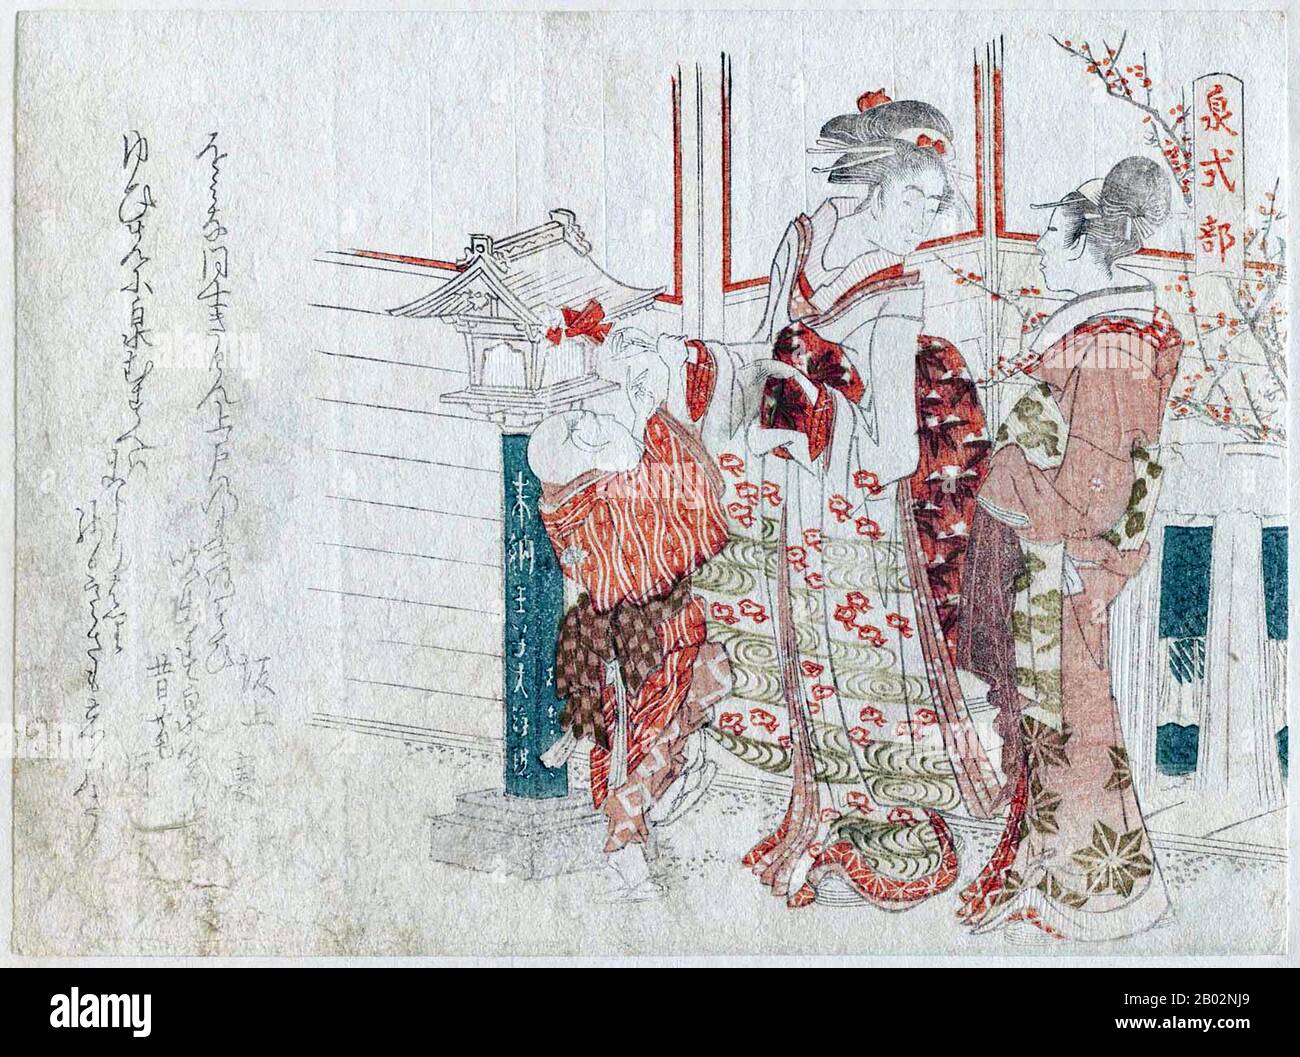 A member of the Thirty-six Medieval Poetry Immortals, Izumi Shikibu served at the court of Empress Shoshi (988–1074).  She is best known for the Izumi Shikibu Collection (和泉式部集 Izumi Shikibu-shū) and the Imperial anthologies. Her life of love and passion earned her the nickname of 'The Floating Lady' from Michinaga. Her poetry is characterized by passion and sentimental appeal. Her style was the direct opposite of that of Akazome Emon, even though both served in the same court and were close friends.  At the court she also nursed a growing rivalry with Murasaki Shikibu, who had a similar poeti Stock Photo